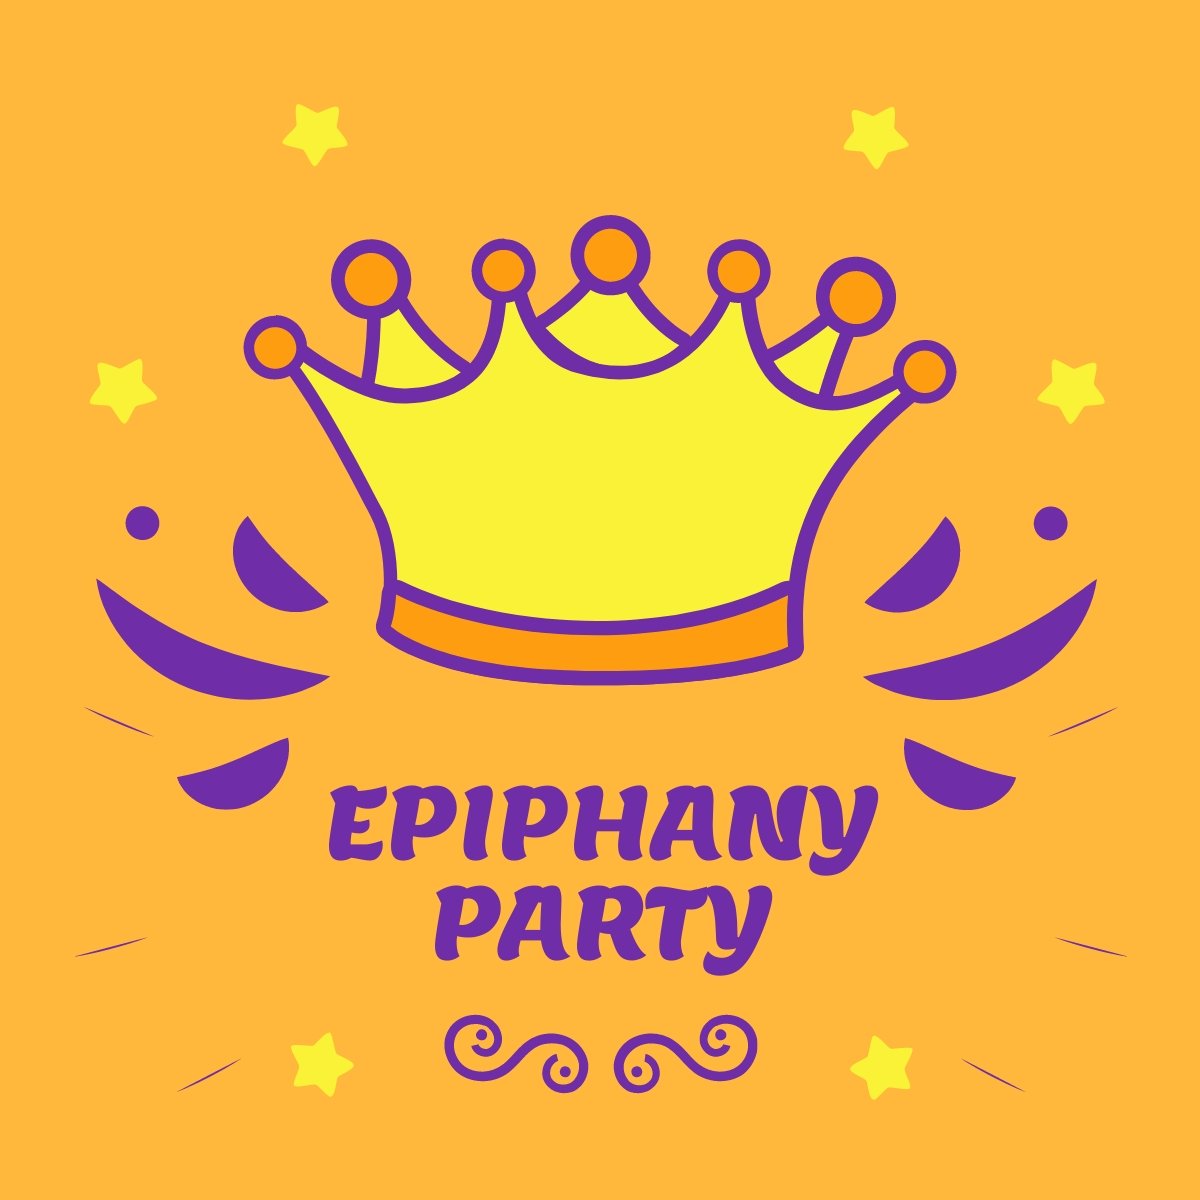 Epiphany Party Linkedin Post Template